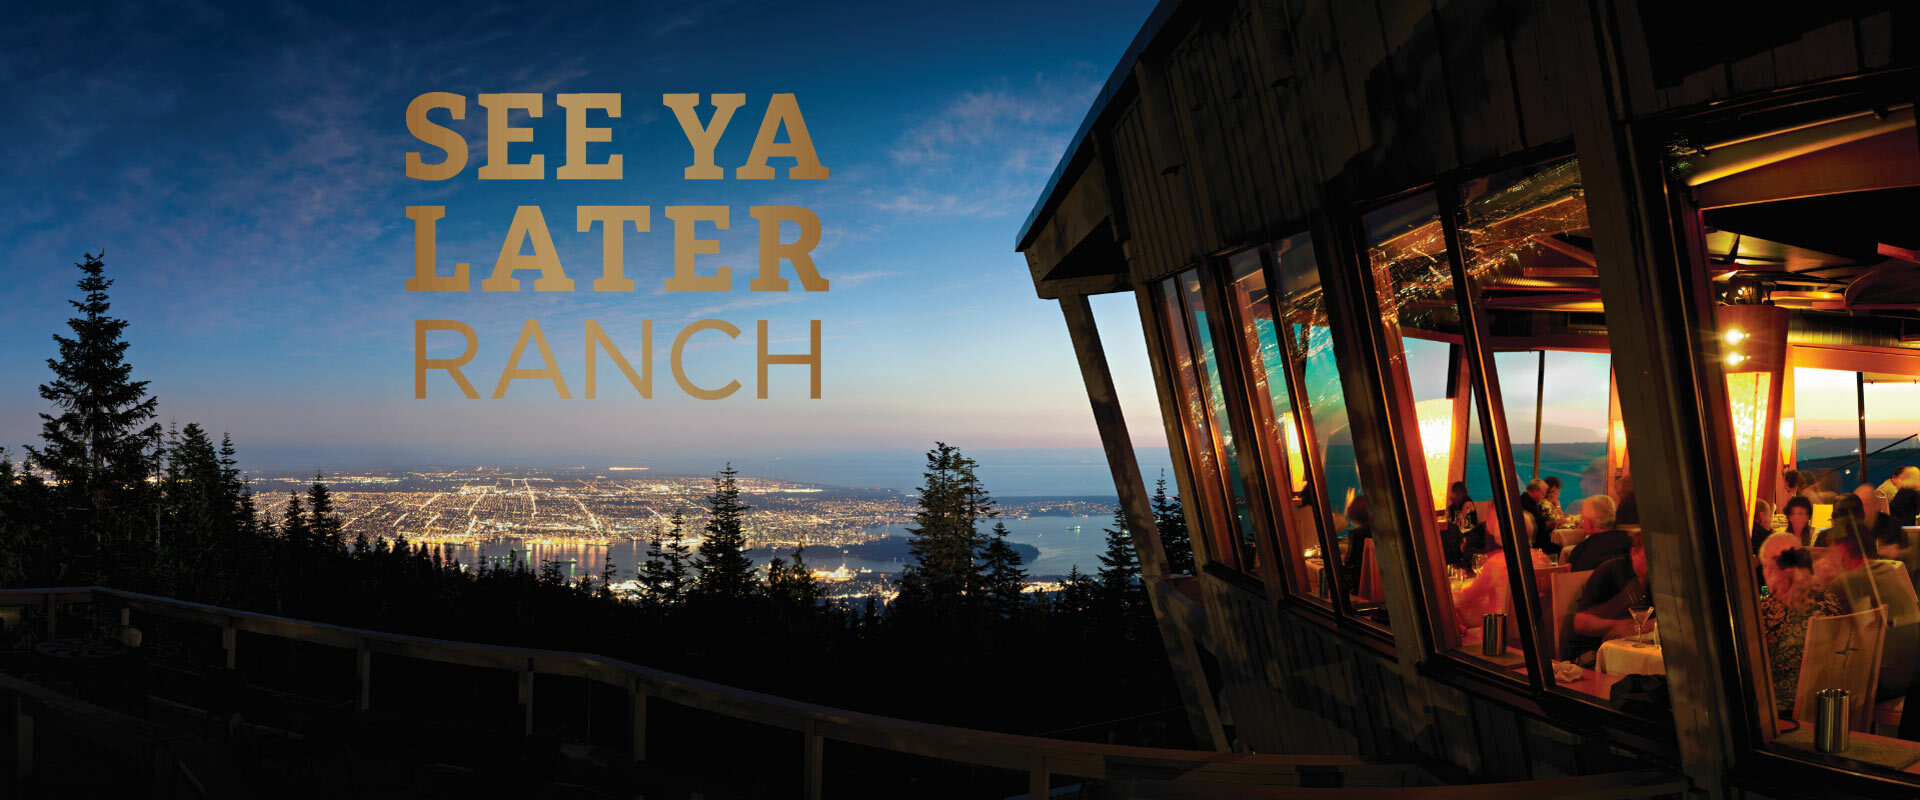 Join us for Winermaker's Dinner featuring See Ya Later Ranch